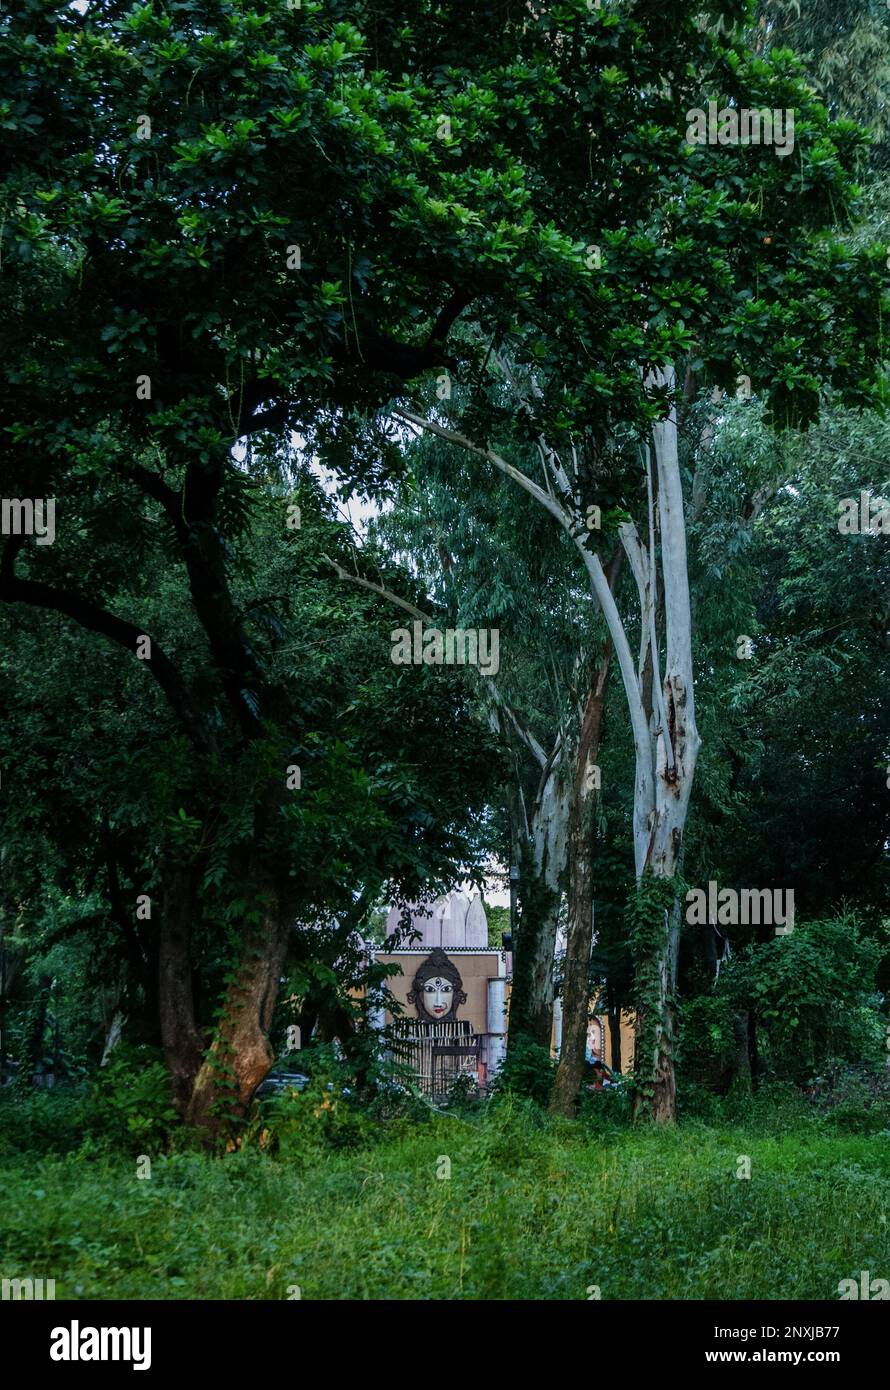 Natural picture of Dhaka city in Bangladesh. Some birds picture in a tree. Stock Photo